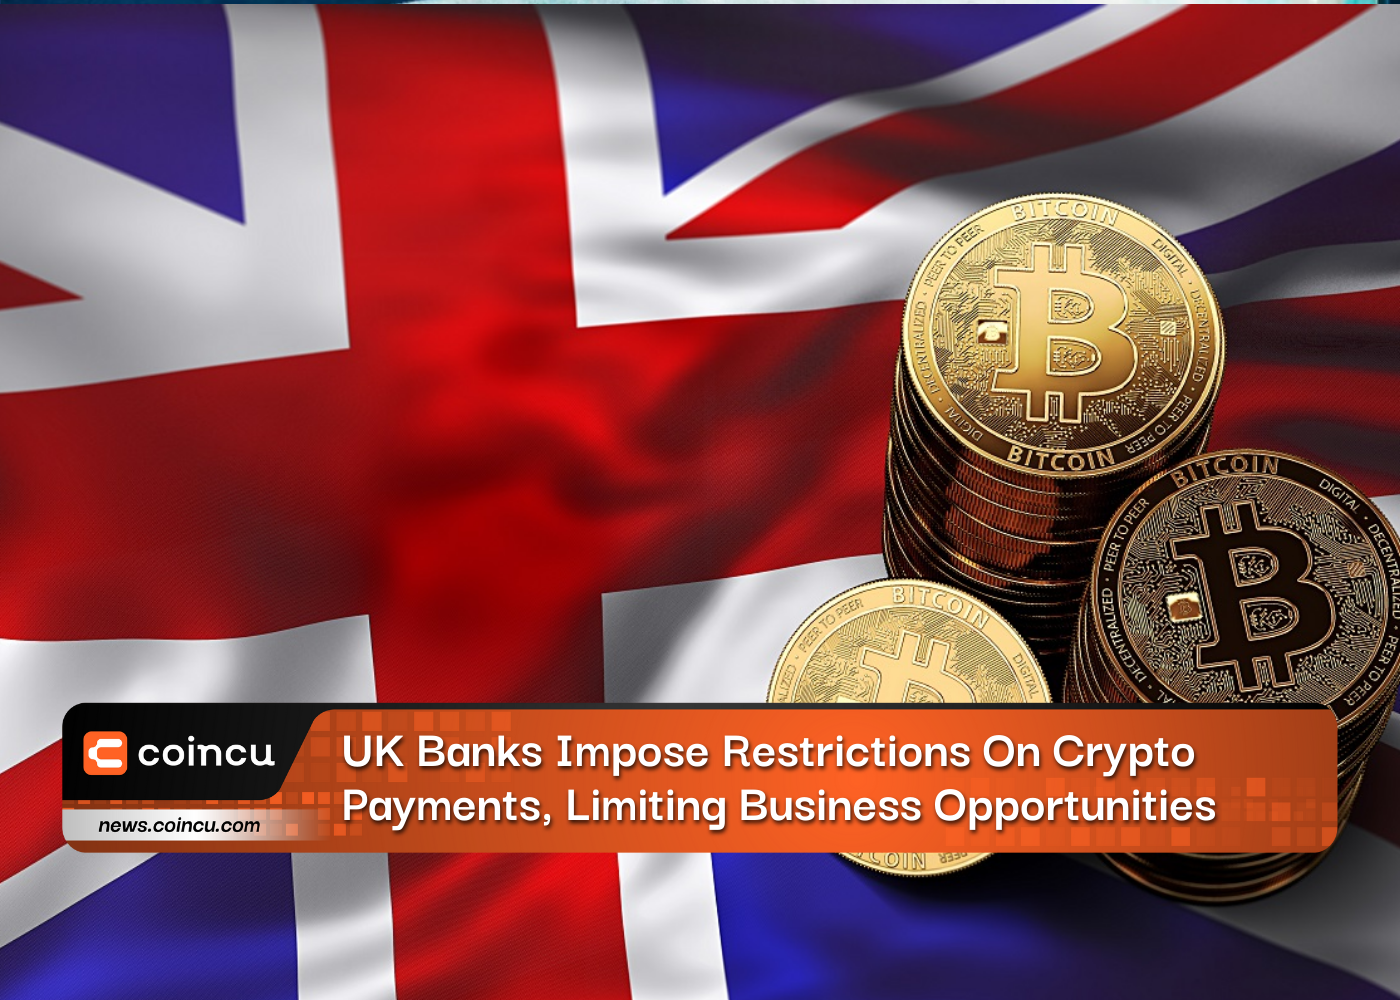 UK Banks Impose Restrictions On Crypto Payments, Limiting Business Opportunities